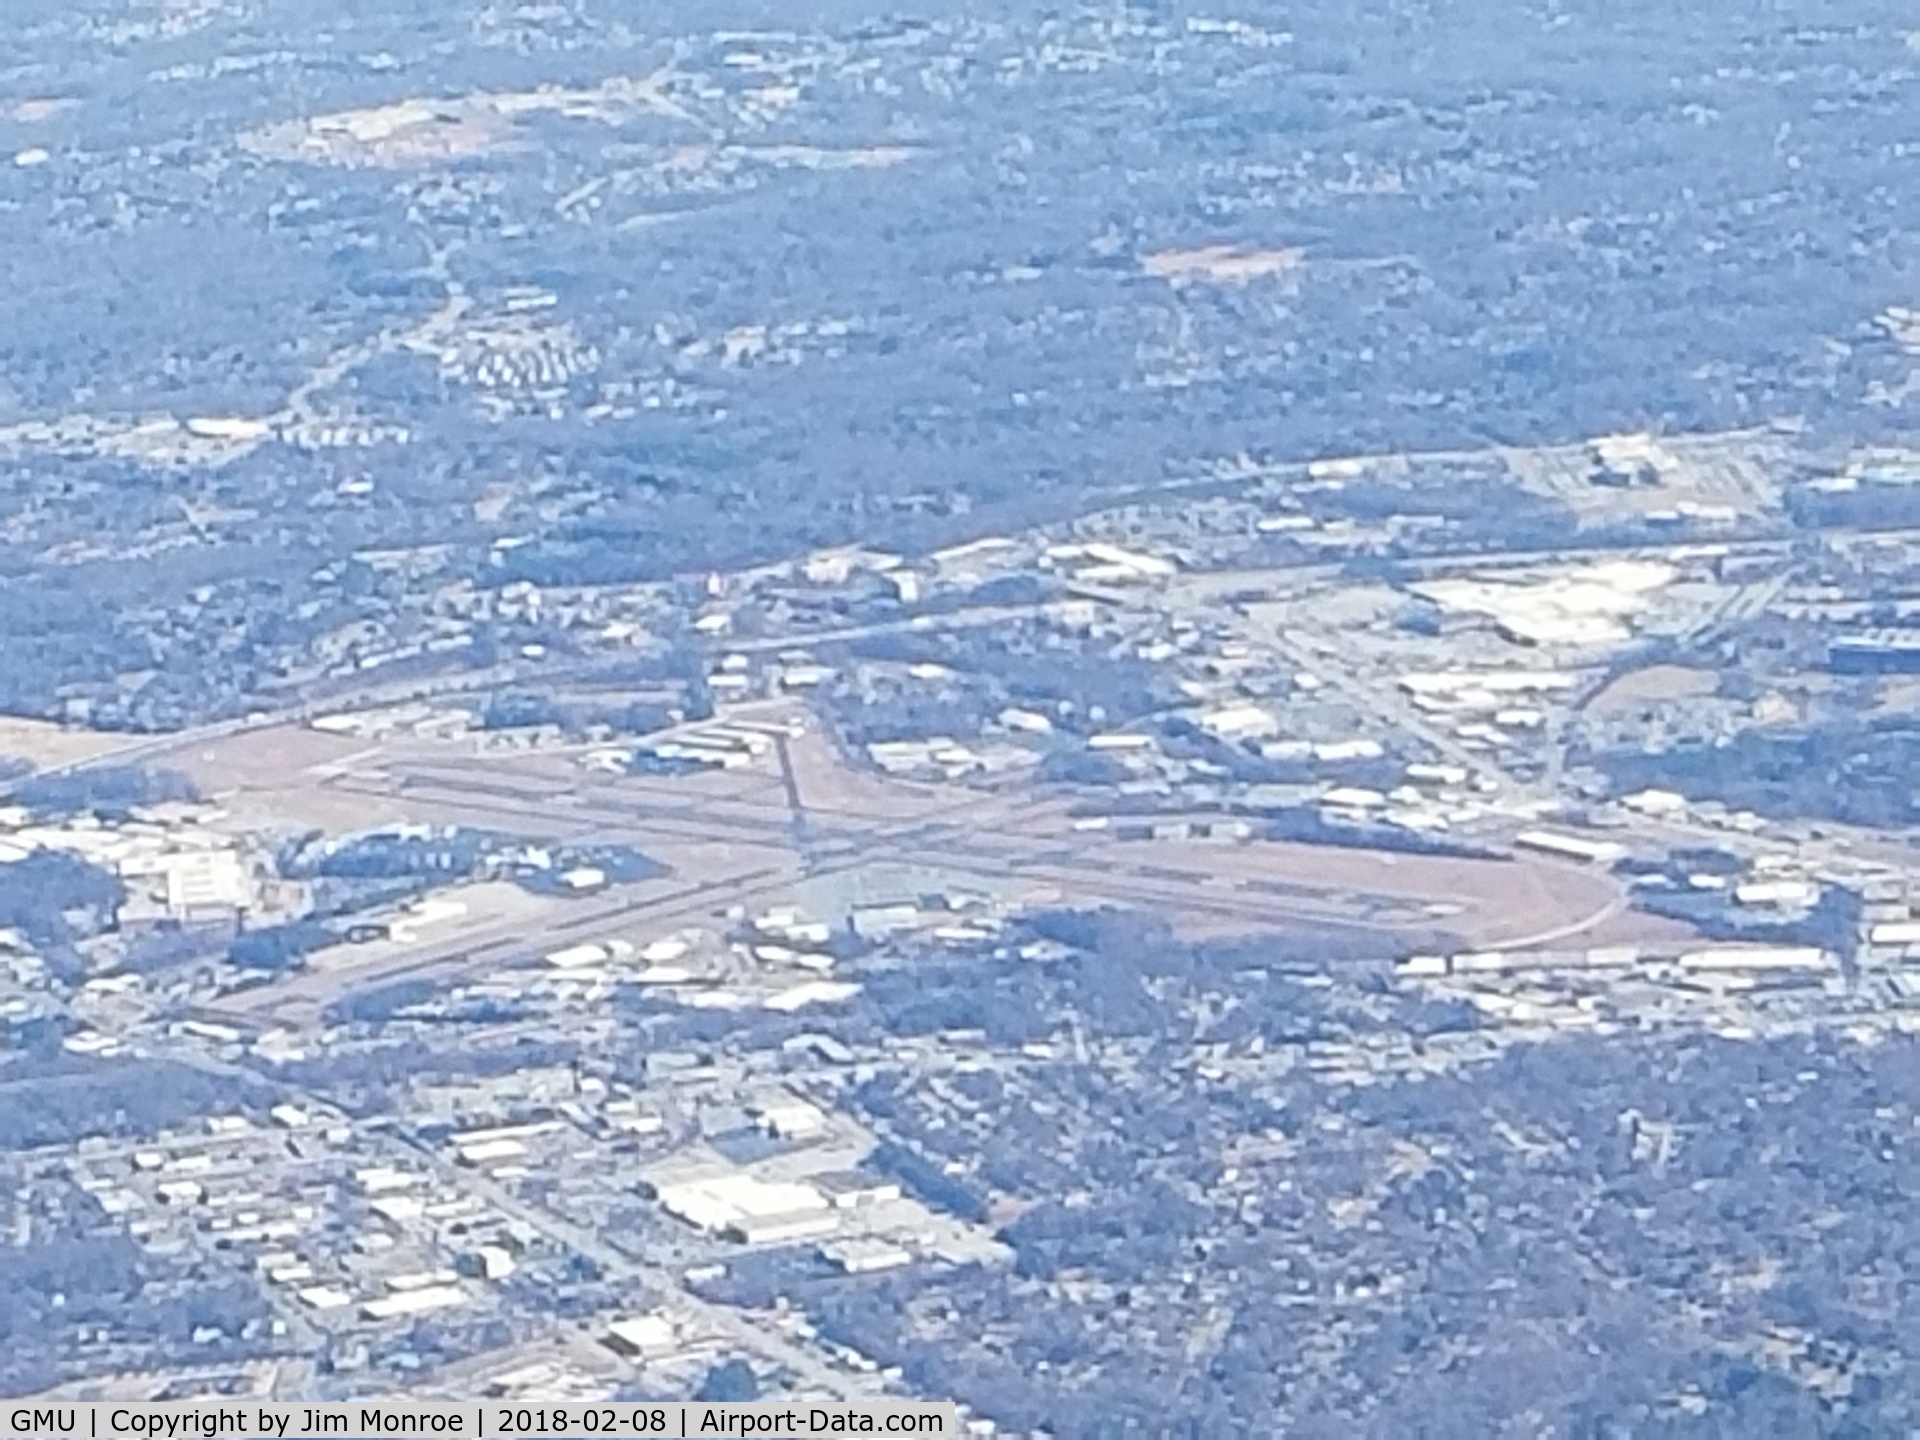 Greenville Downtown Airport (GMU) - From 9,000 feet on an Angel Flight from ATlanta to Winston Salem